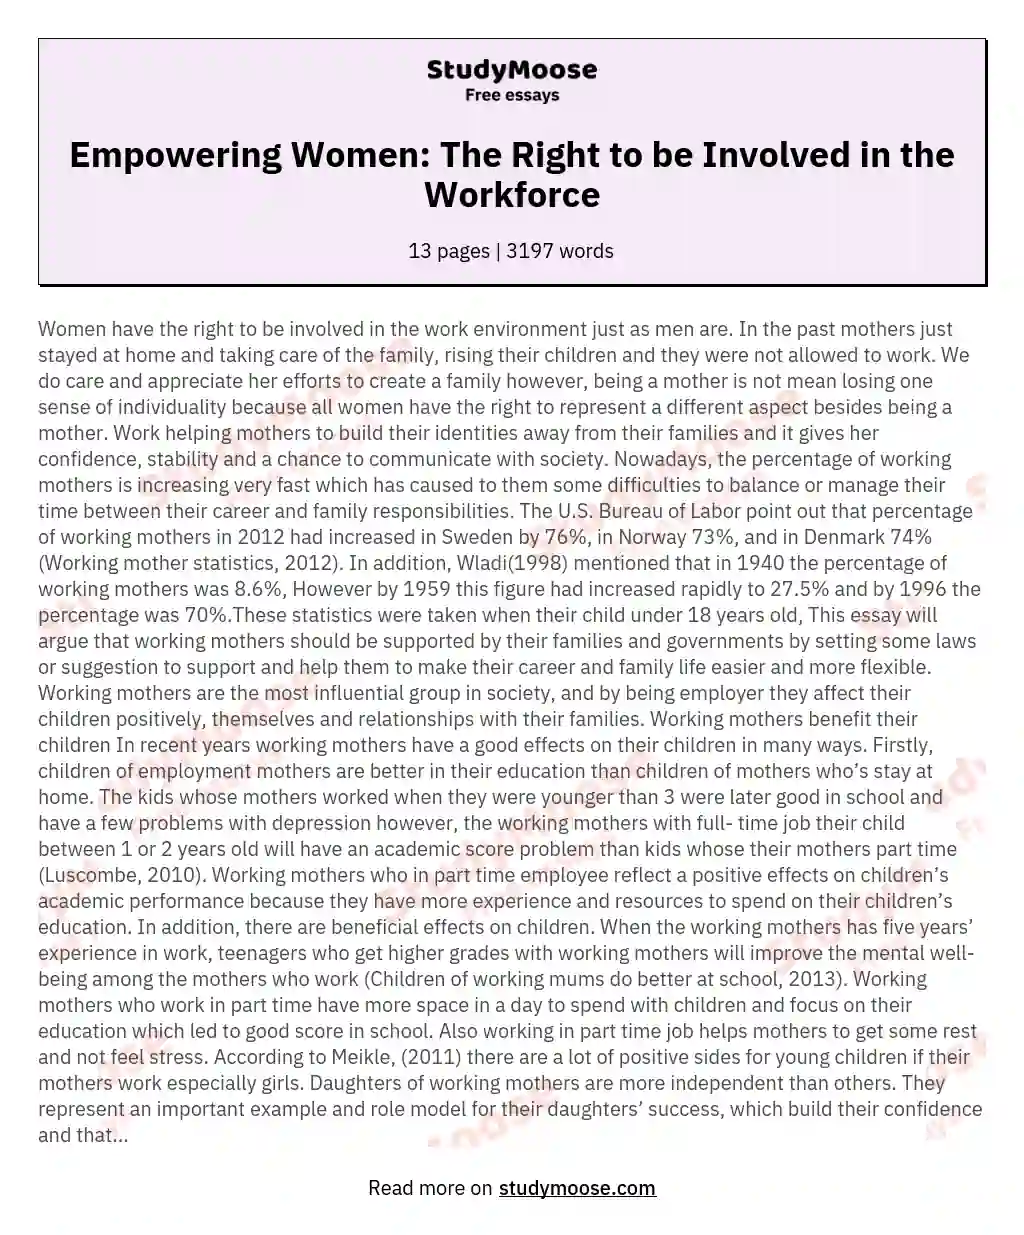 Empowering Women: The Right to be Involved in the Workforce essay